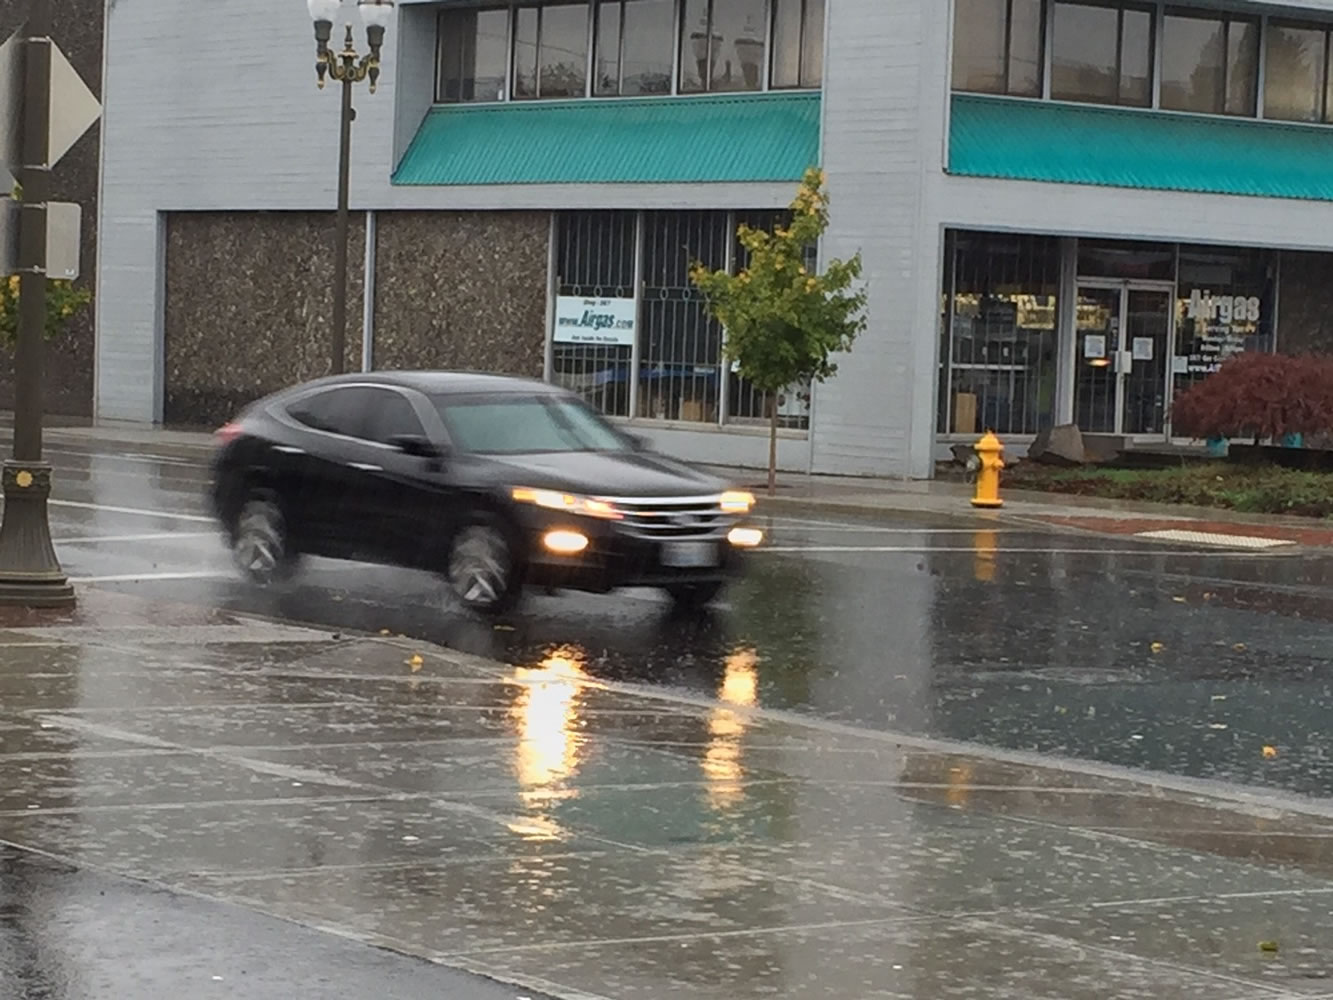 A car speeds down West Eighth Street in Vancouver during Saturday's rainstorm.